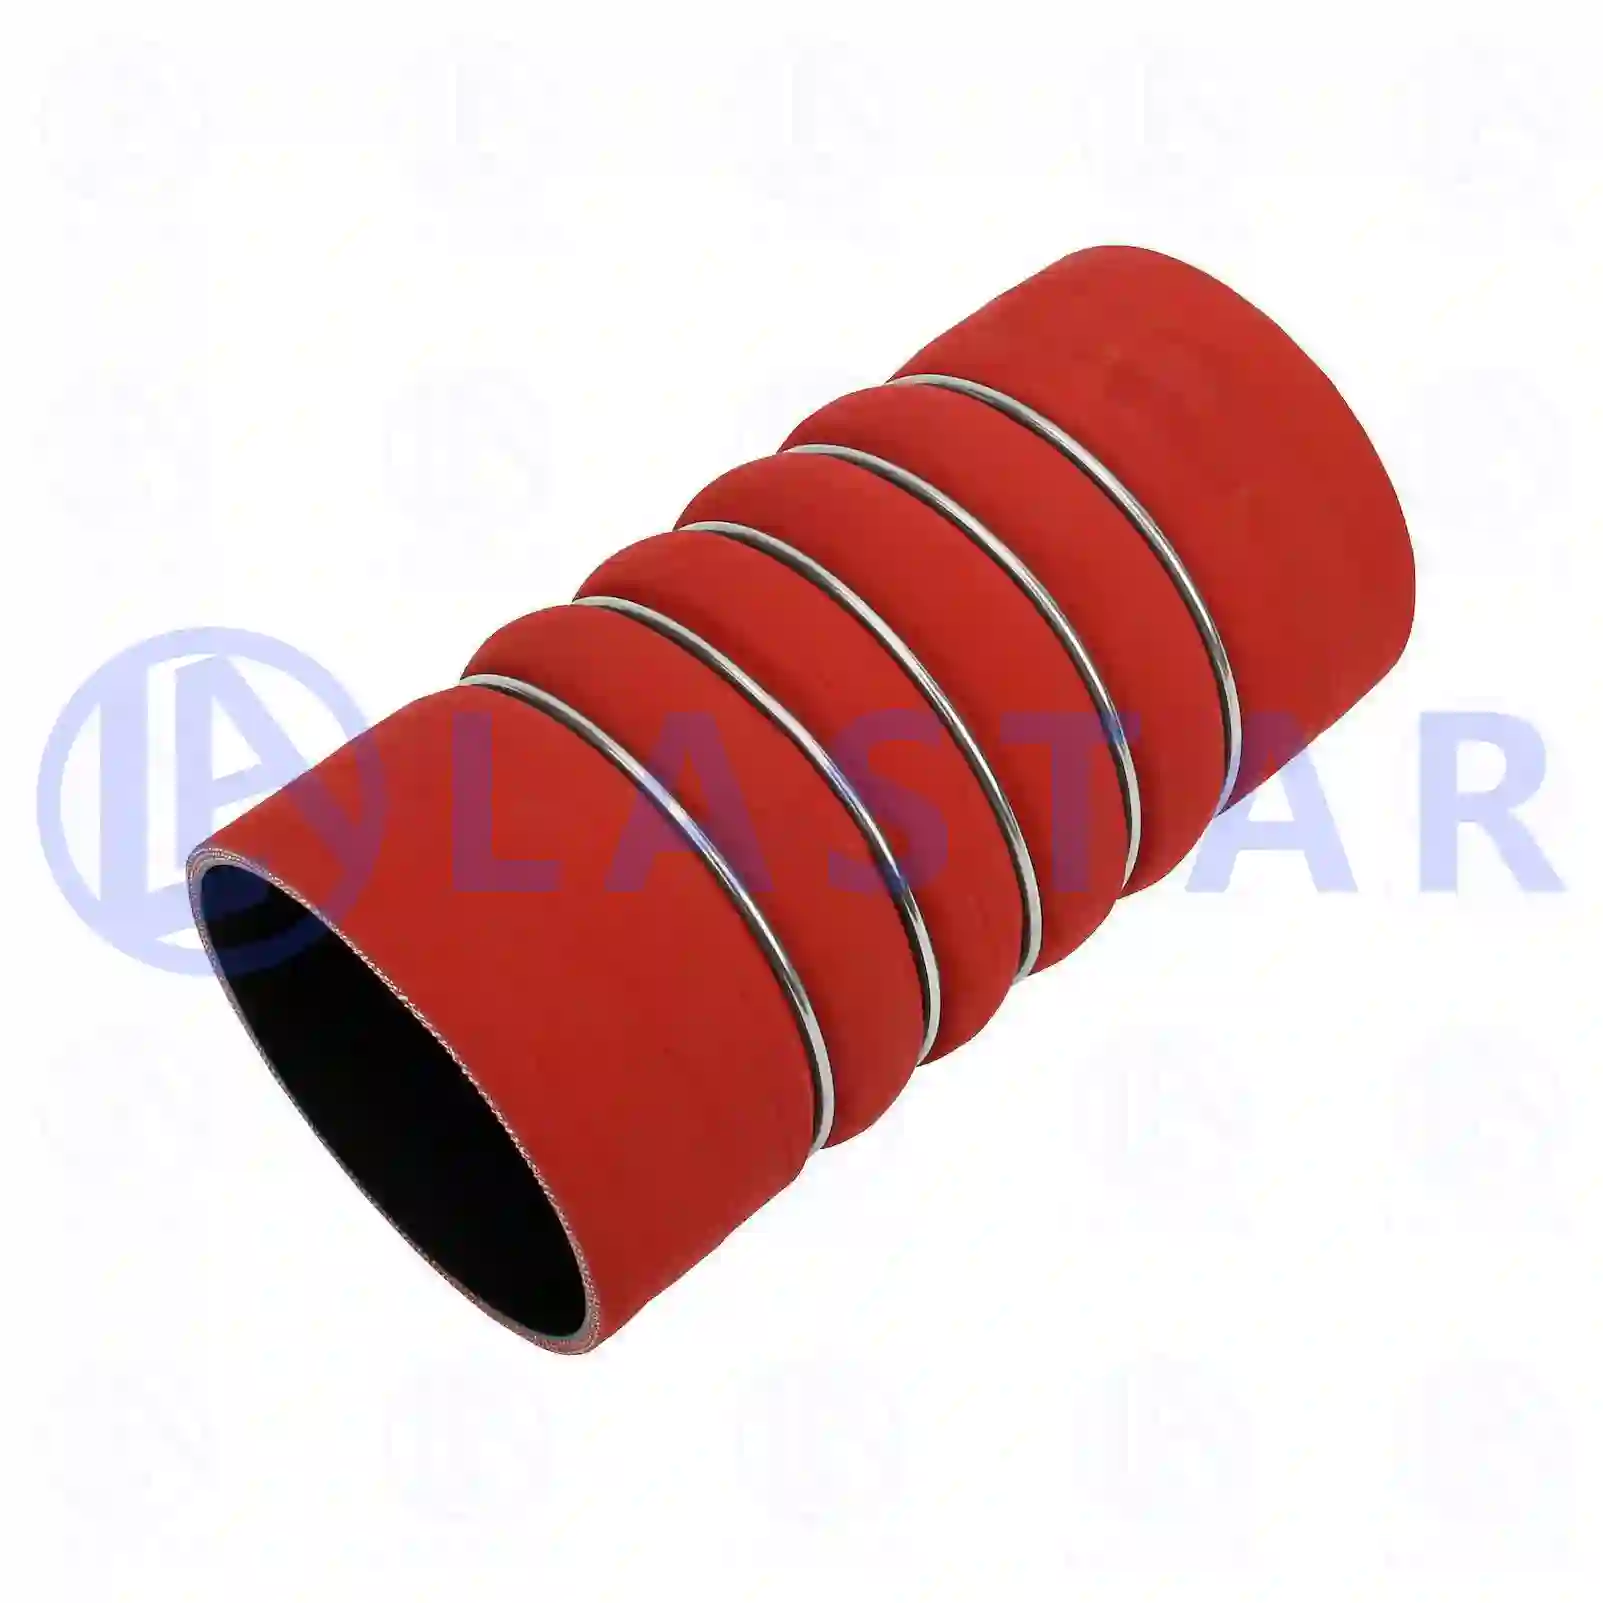 Charge air hose, 77708232, N1011009048, 0010947982, 0020941782, 0020945482, 0020946382, ZG00299-0008 ||  77708232 Lastar Spare Part | Truck Spare Parts, Auotomotive Spare Parts Charge air hose, 77708232, N1011009048, 0010947982, 0020941782, 0020945482, 0020946382, ZG00299-0008 ||  77708232 Lastar Spare Part | Truck Spare Parts, Auotomotive Spare Parts